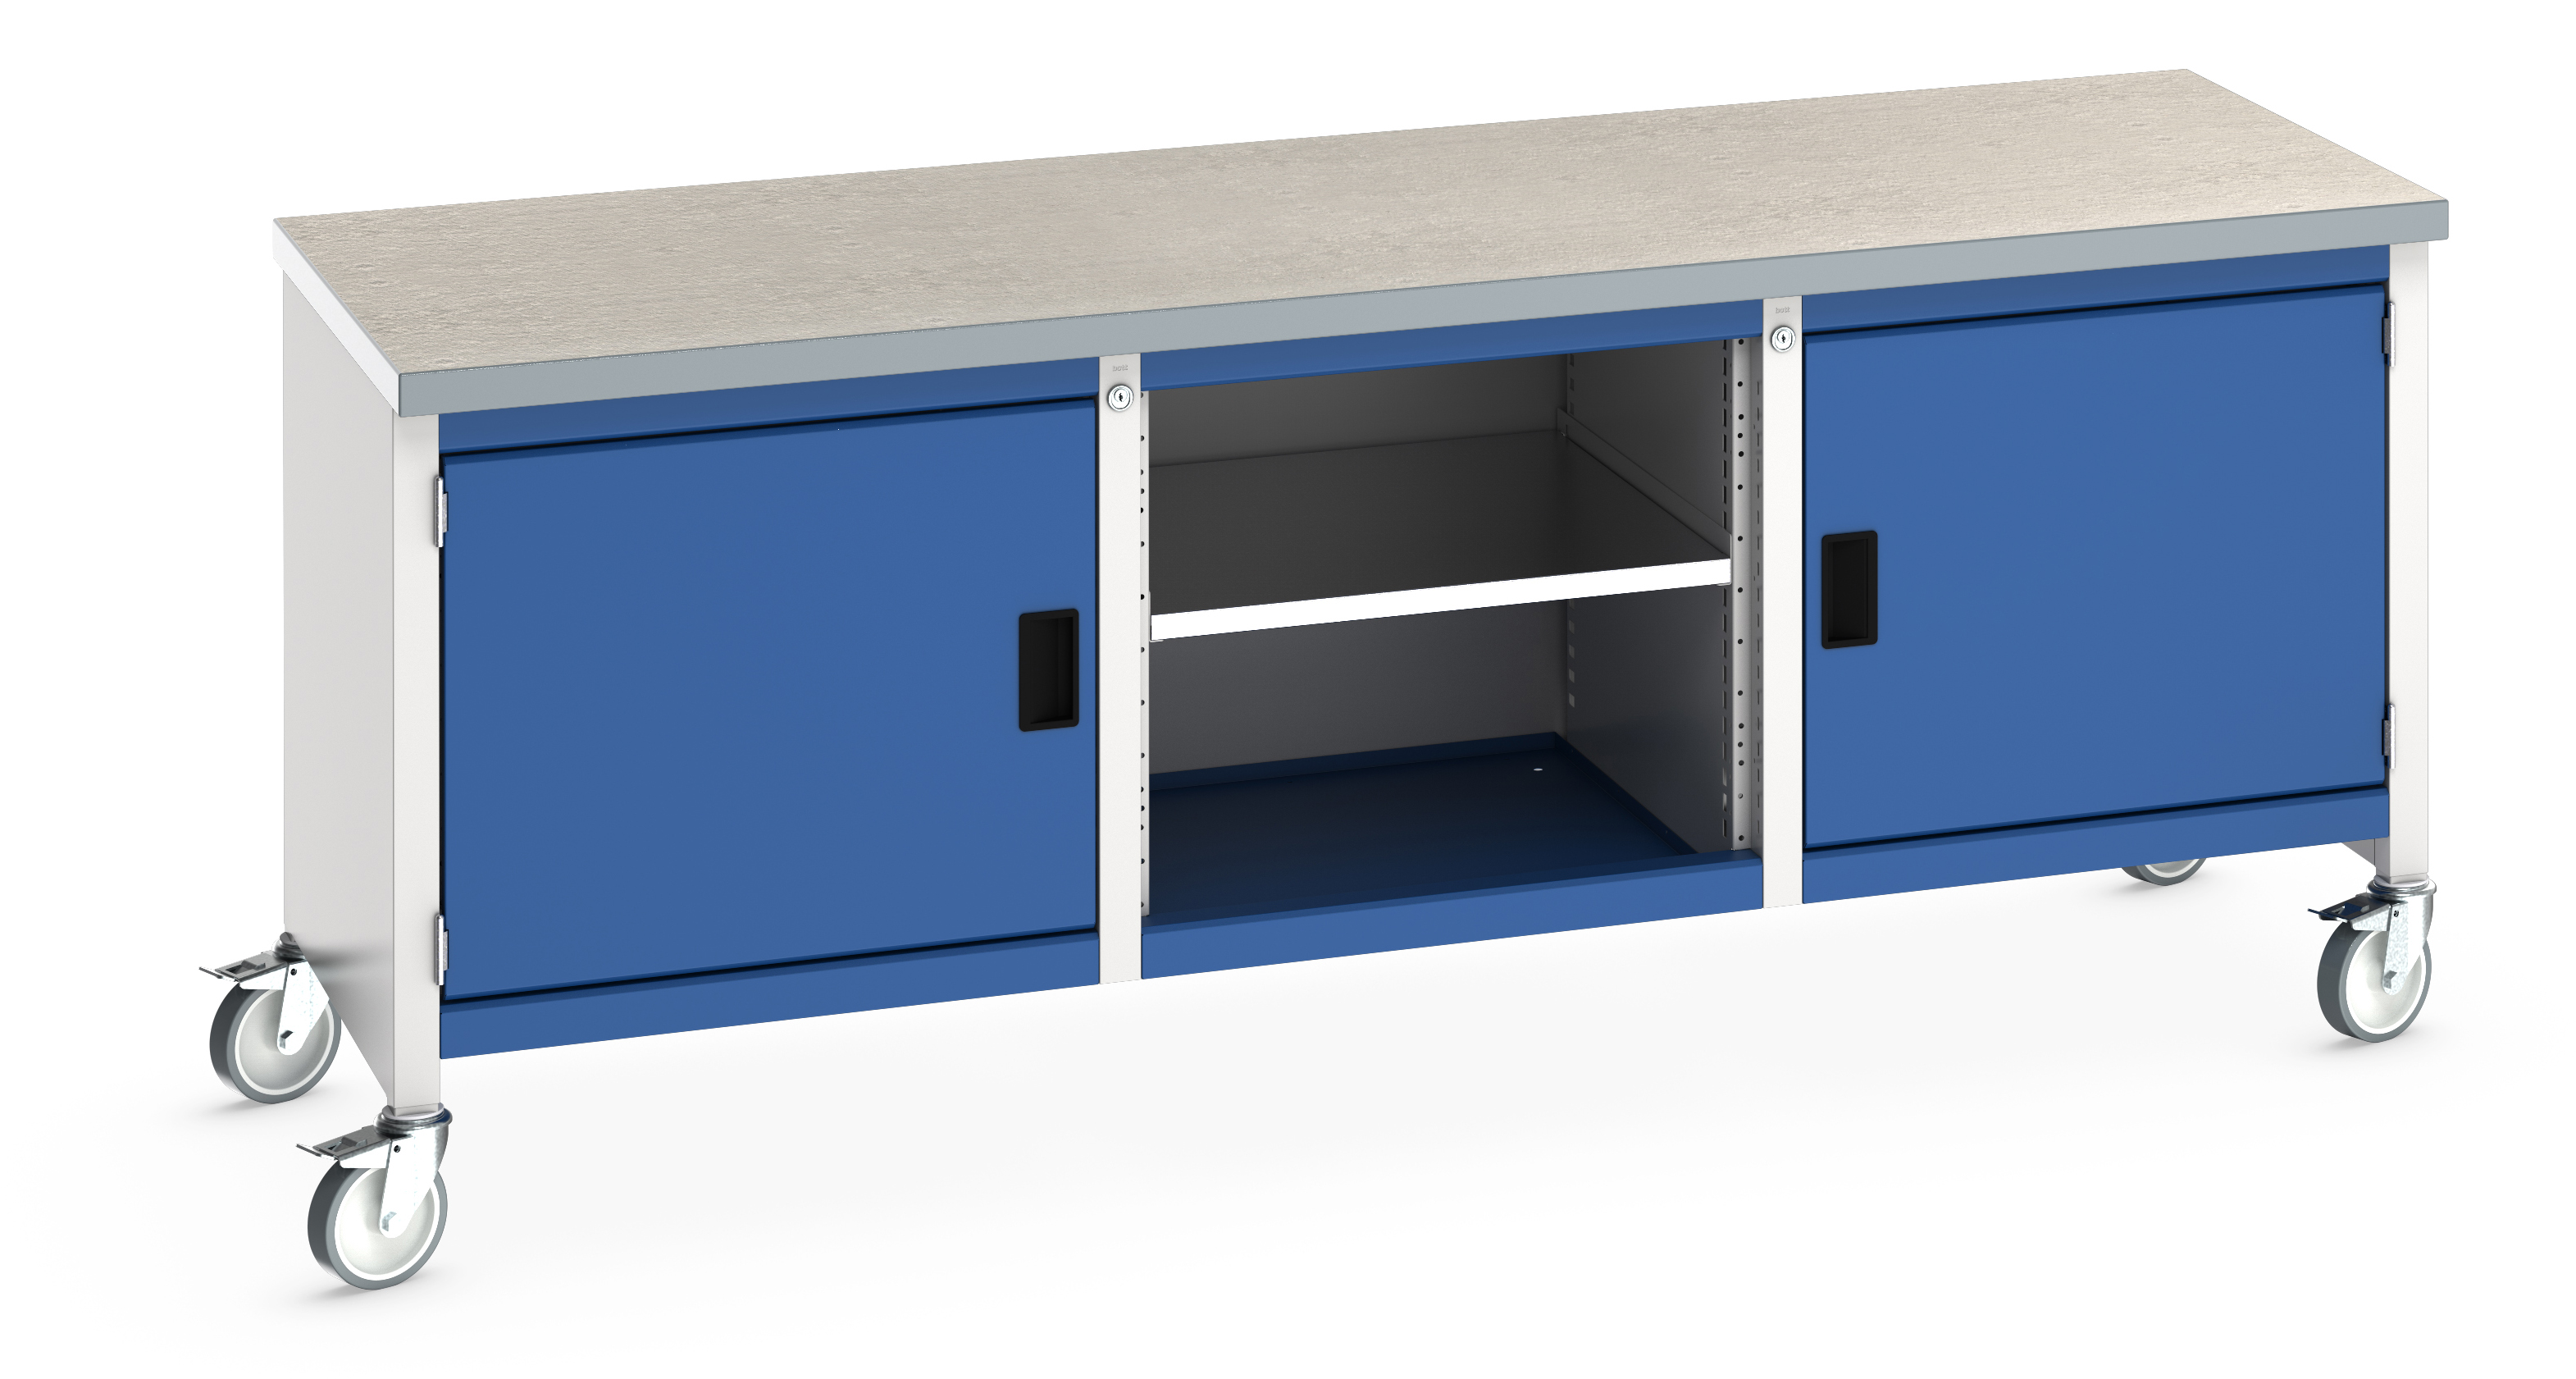 Bott Cubio Mobile Storage Bench With Full Cupboard / Open Cupboard /Full Cupboard - 41002120.11V